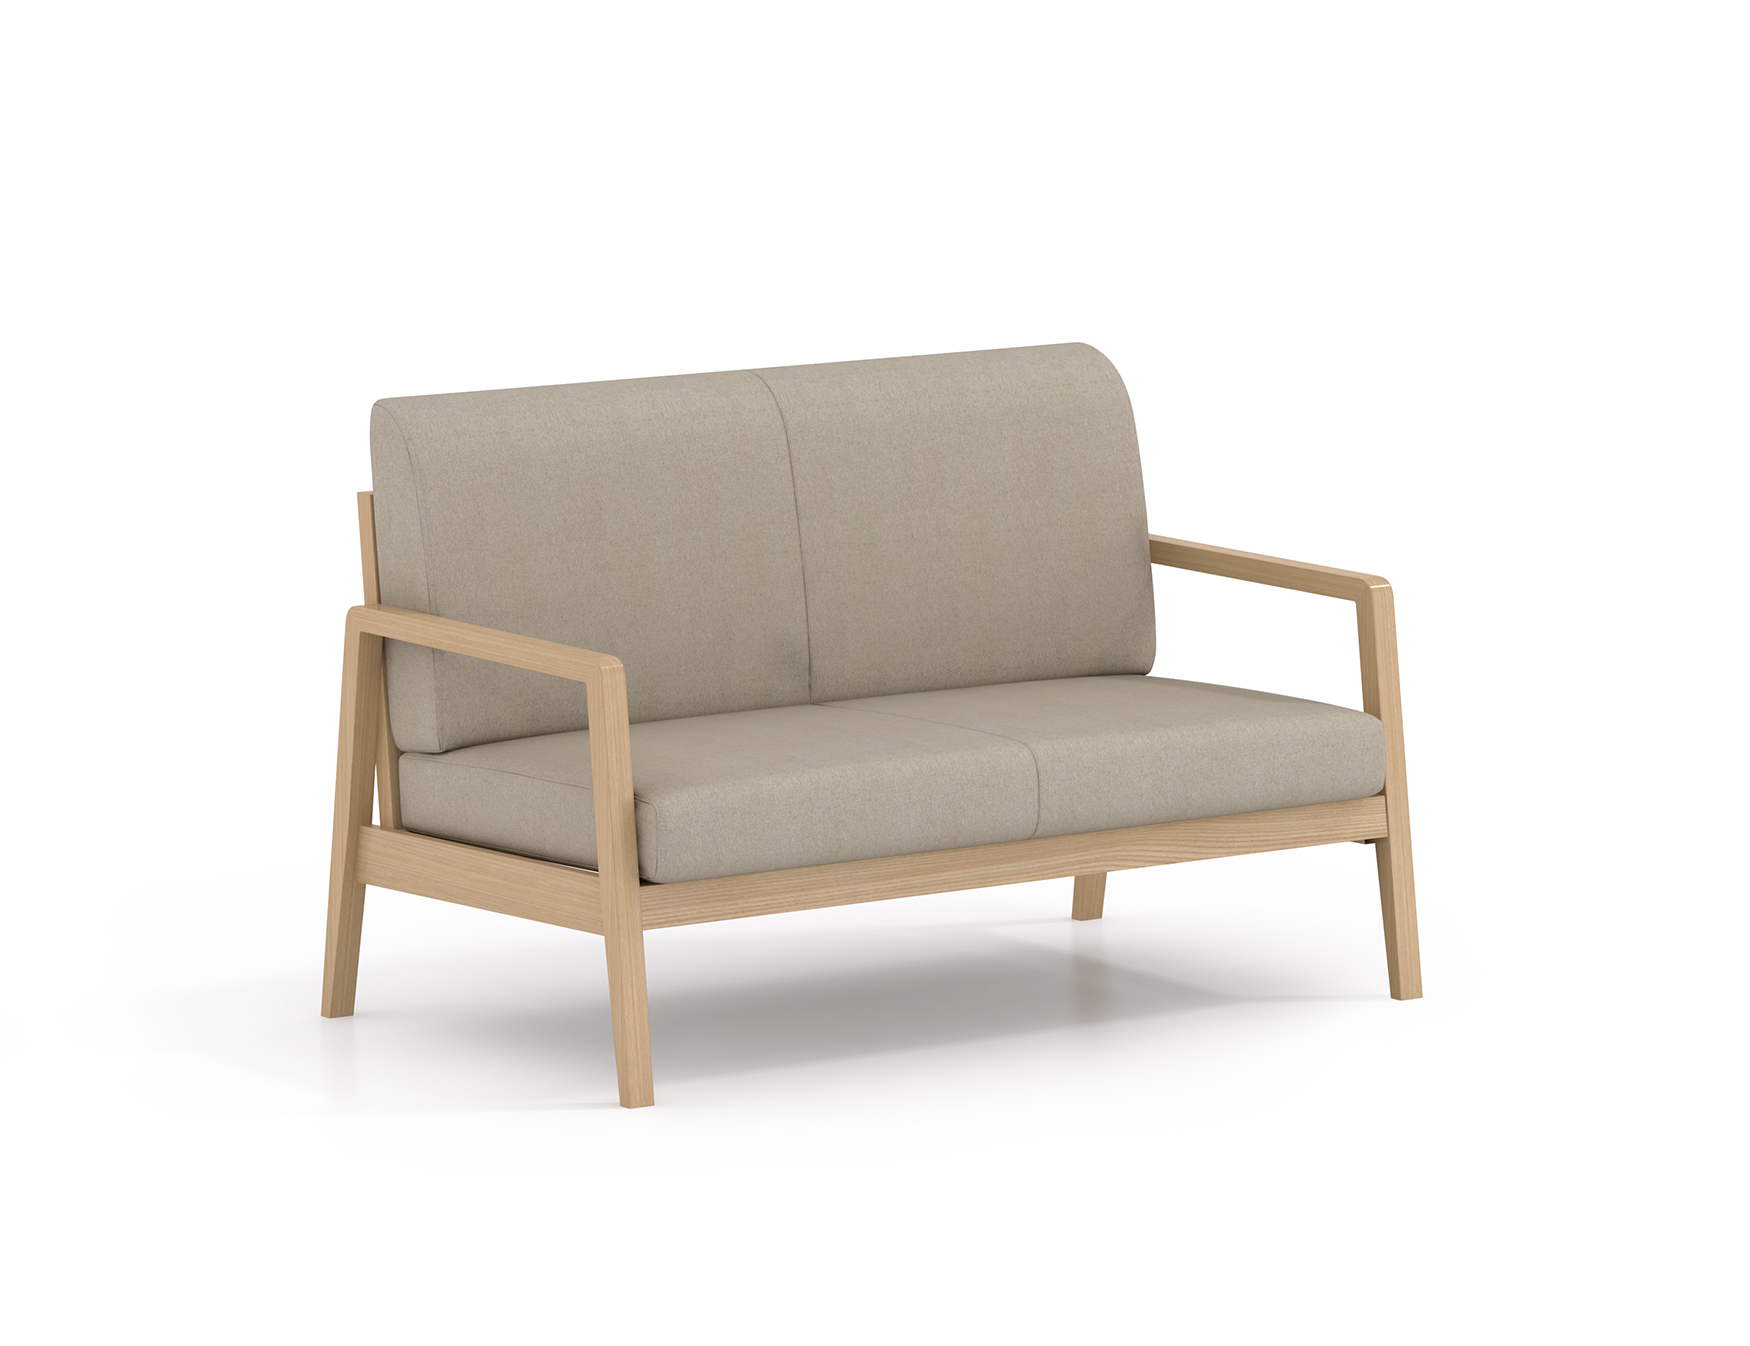 Modern Loveseat Bench Gray Fabric Natural Wood Frame lounge for patient